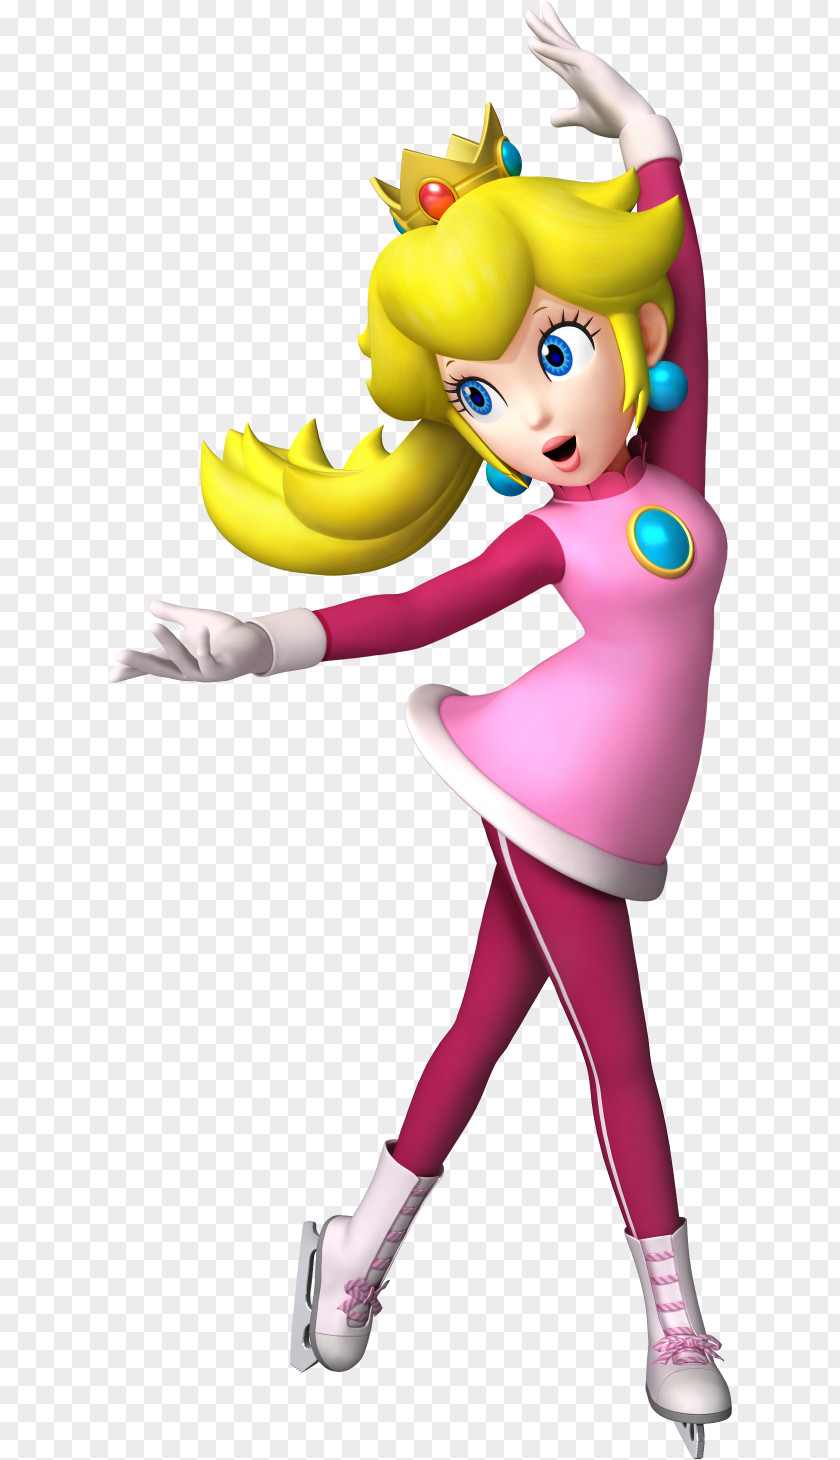 Ace Attorney Mario & Sonic At The Olympic Games Princess Peach Winter Daisy PNG